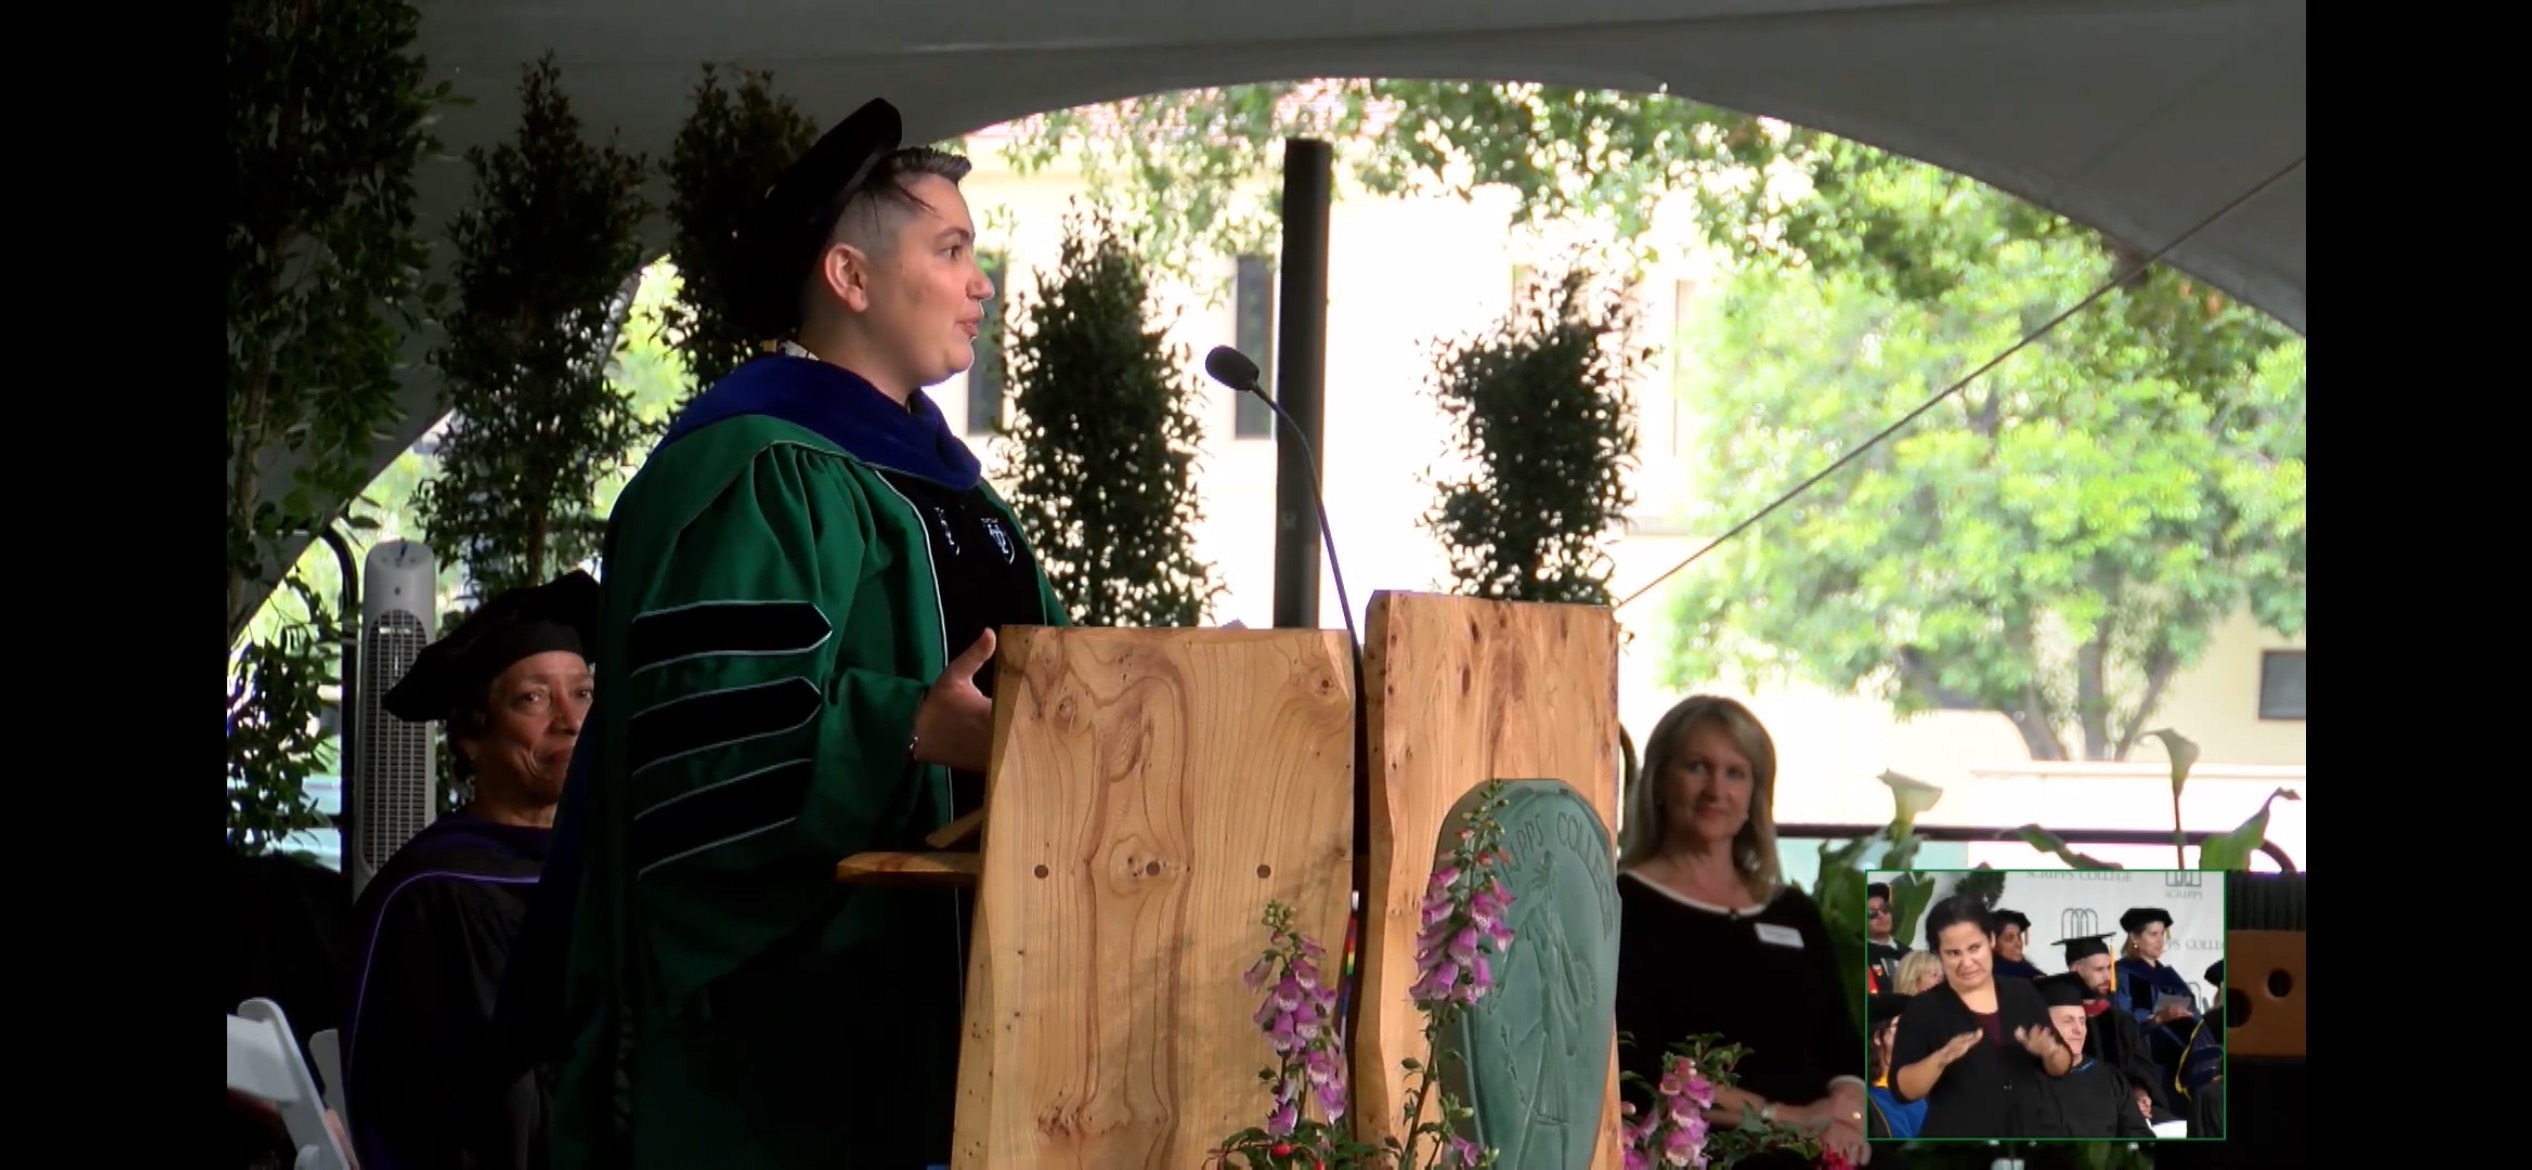 Dr. Cannon giving the Class of 2020 Commencement Speech at Scripps College